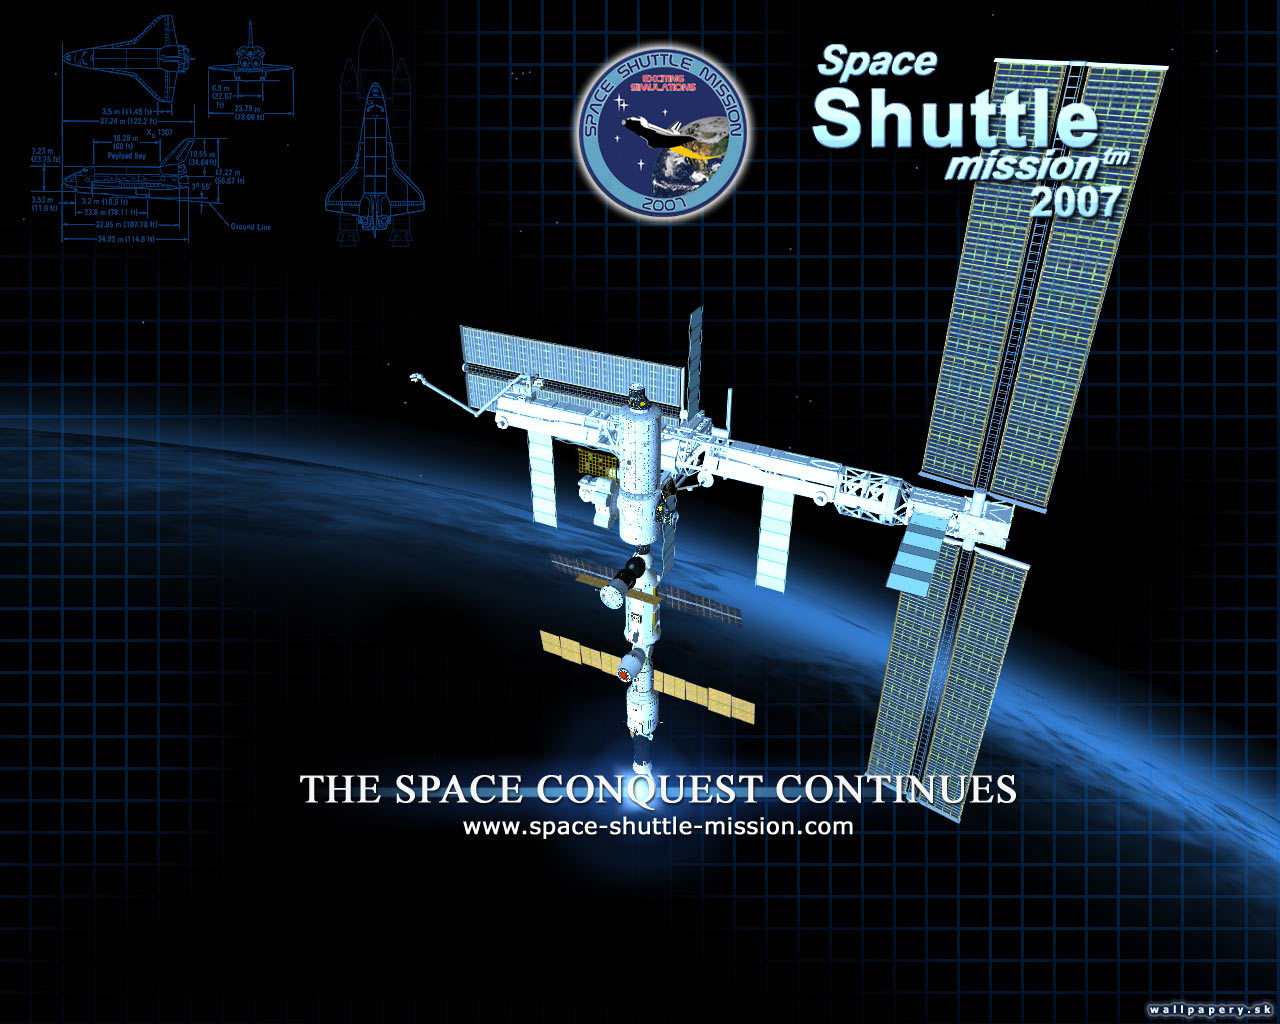 Space Shuttle Mission 2007 - wallpaper 8